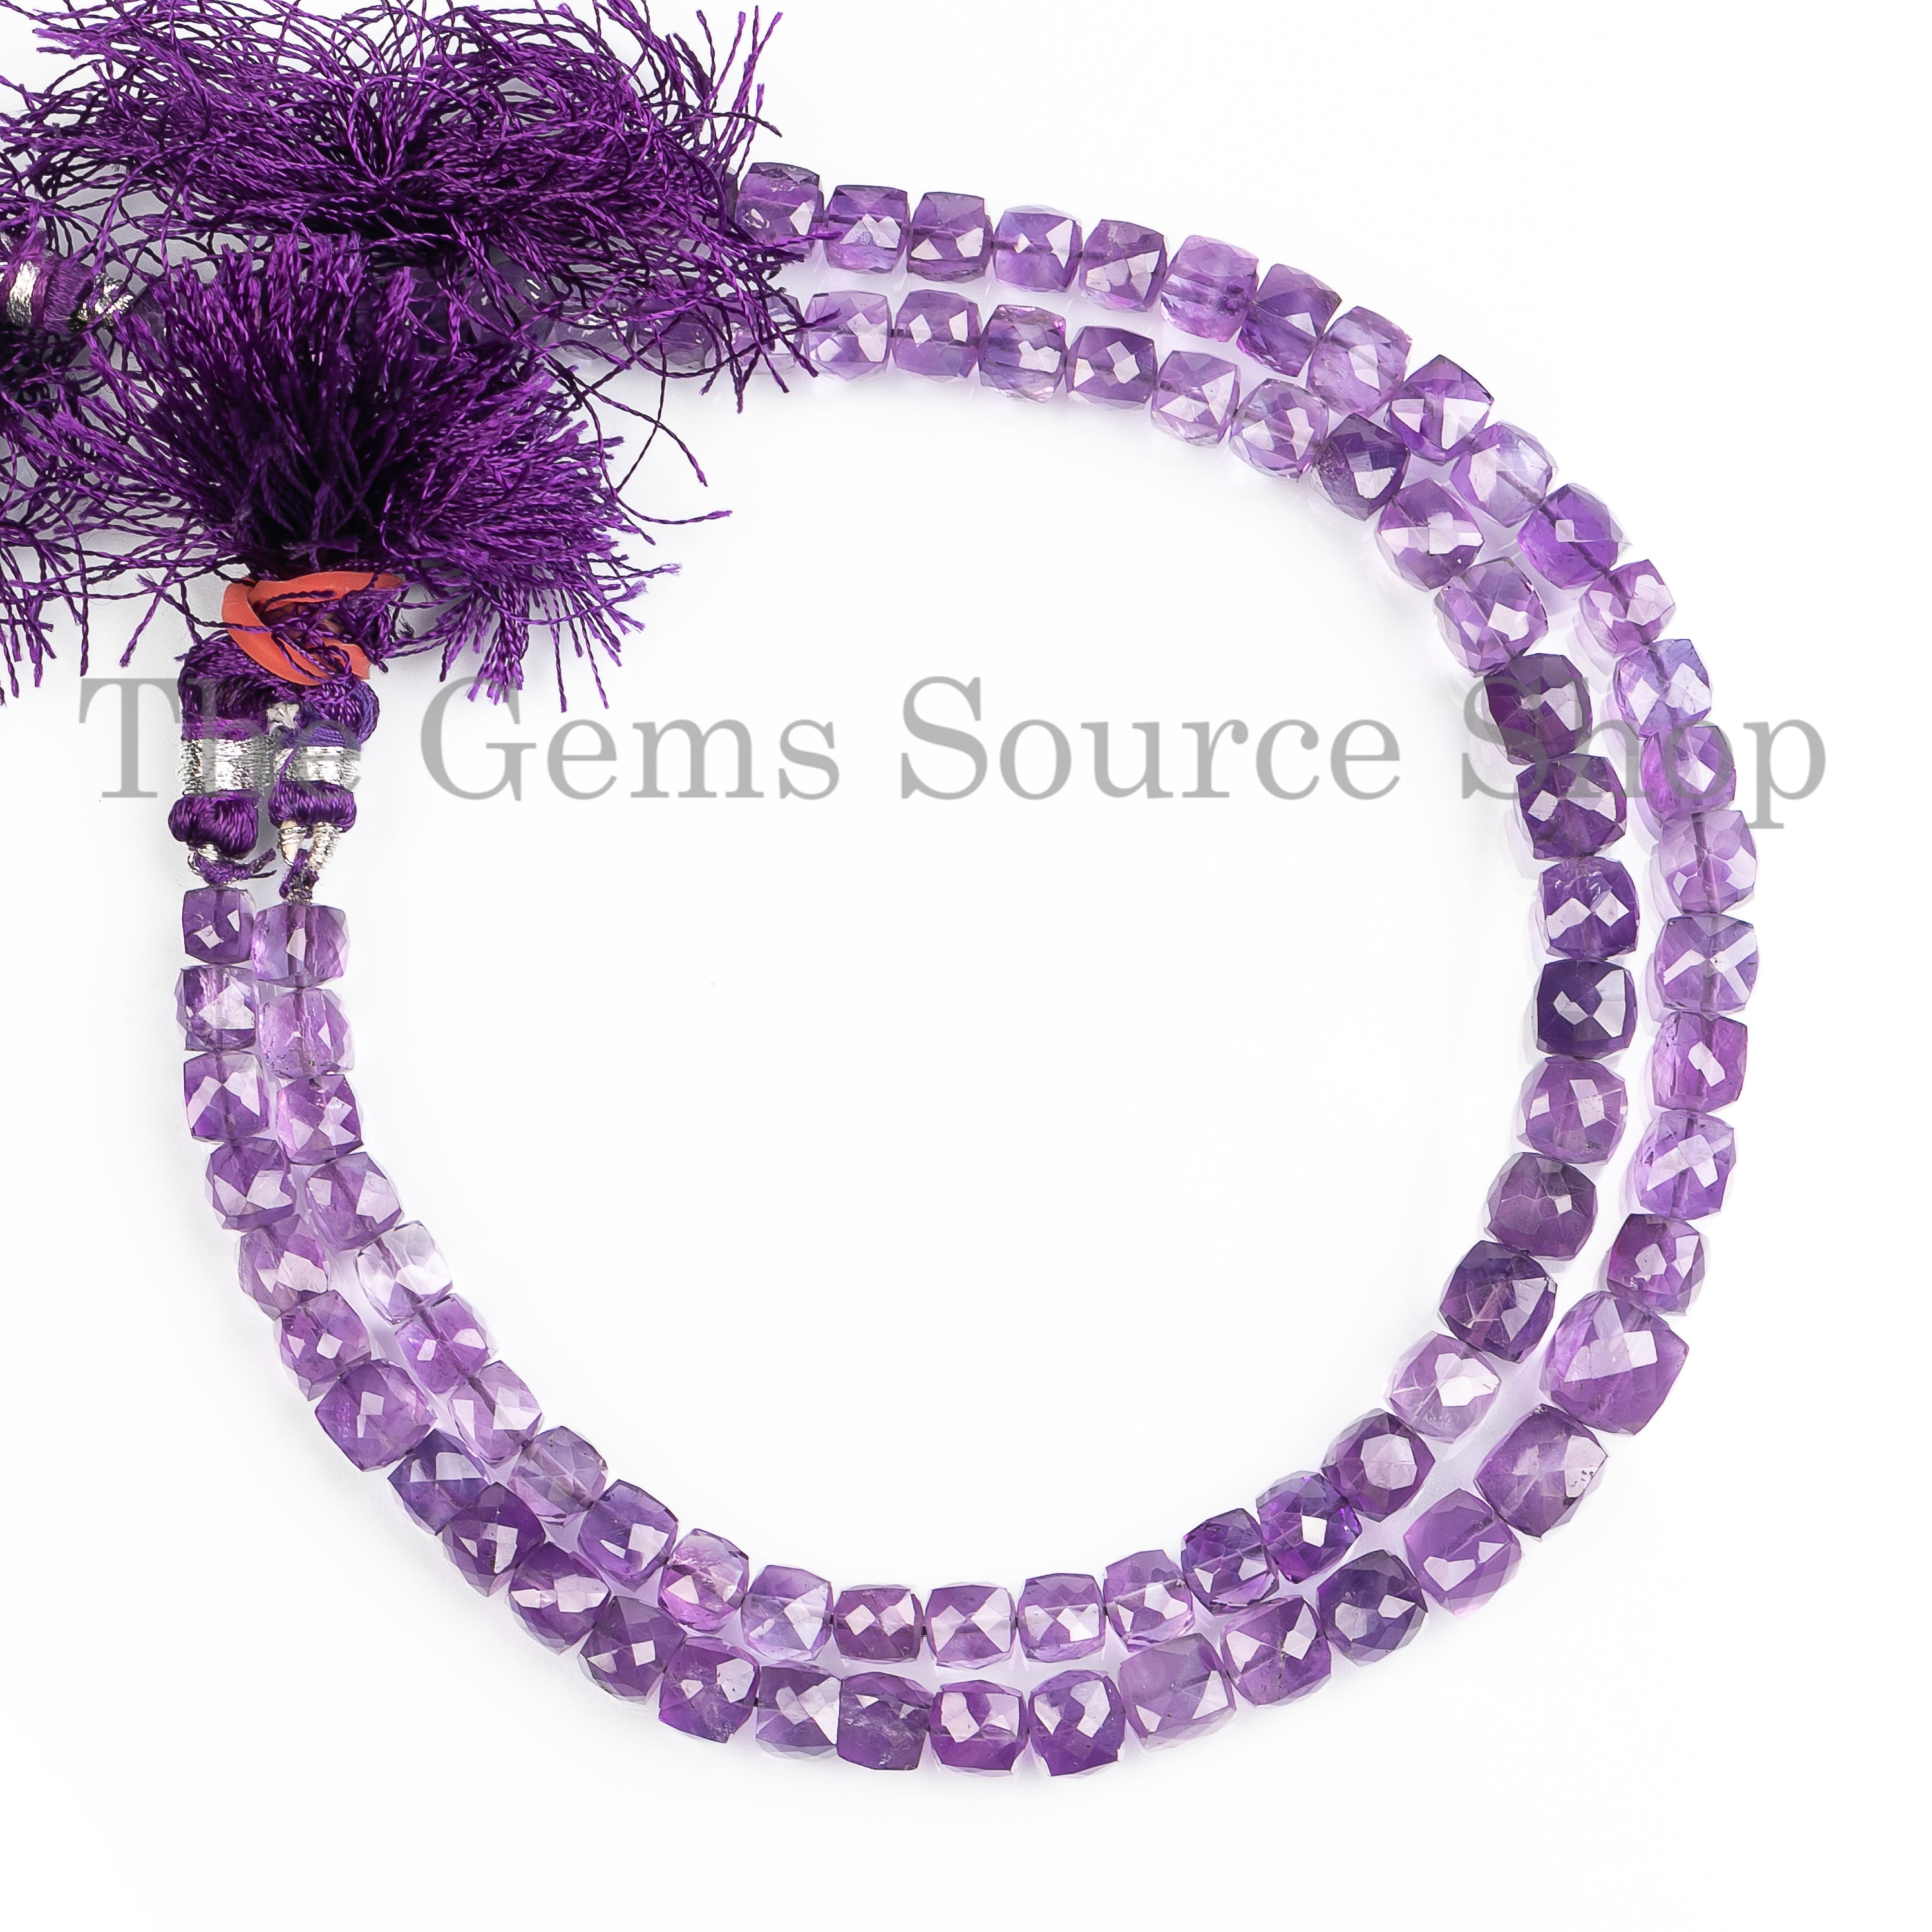 5-7 mm Amethyst Faceted Beads, Amethyst Beads, Amethyst box Shape Natural Beads, Amethyst faceted Gemstone Beads, Amethyst Jewelry Beads